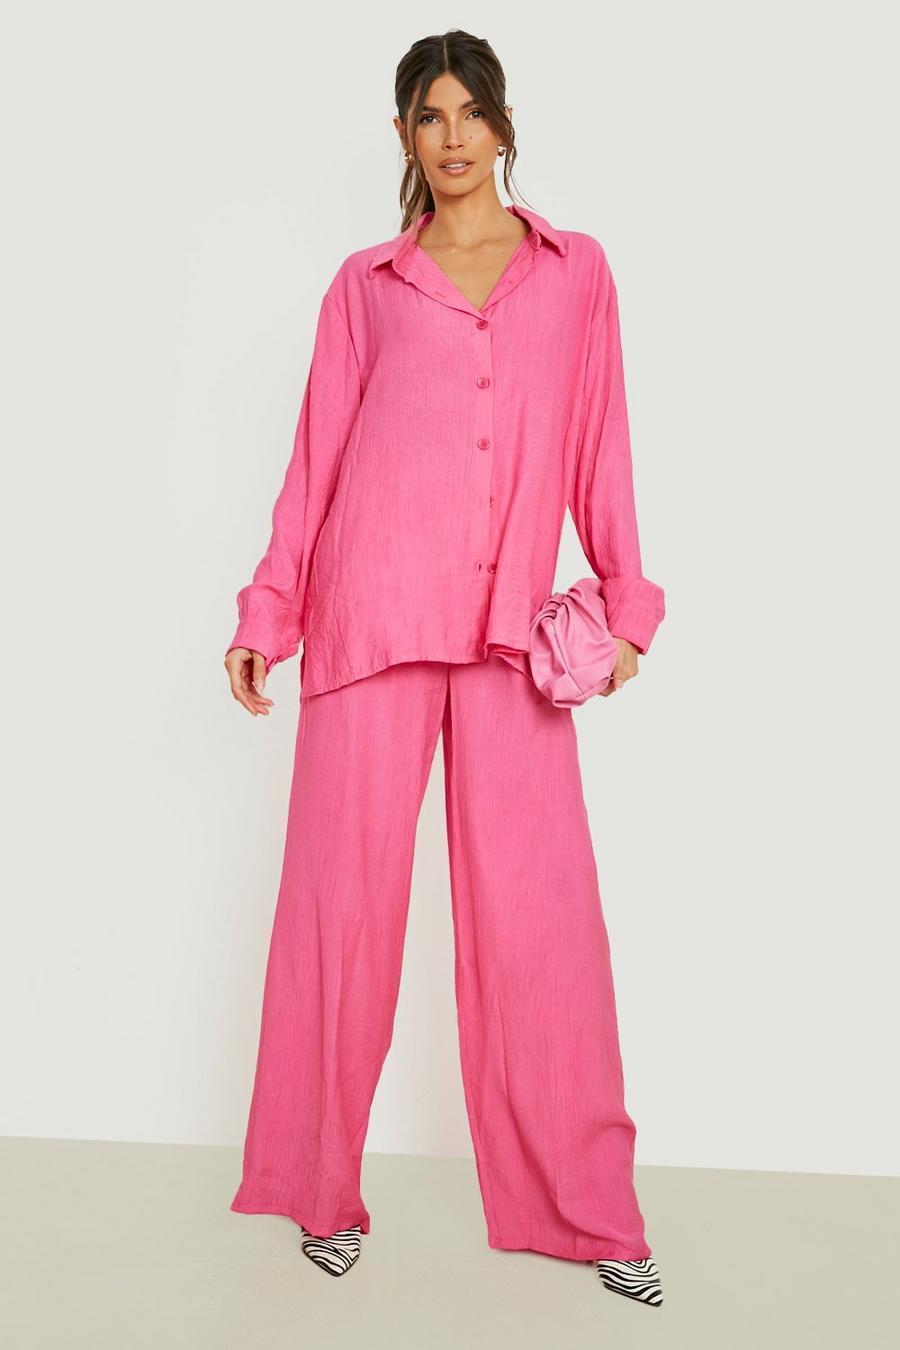 Chemise texturée relax effet lin, Hot pink rose